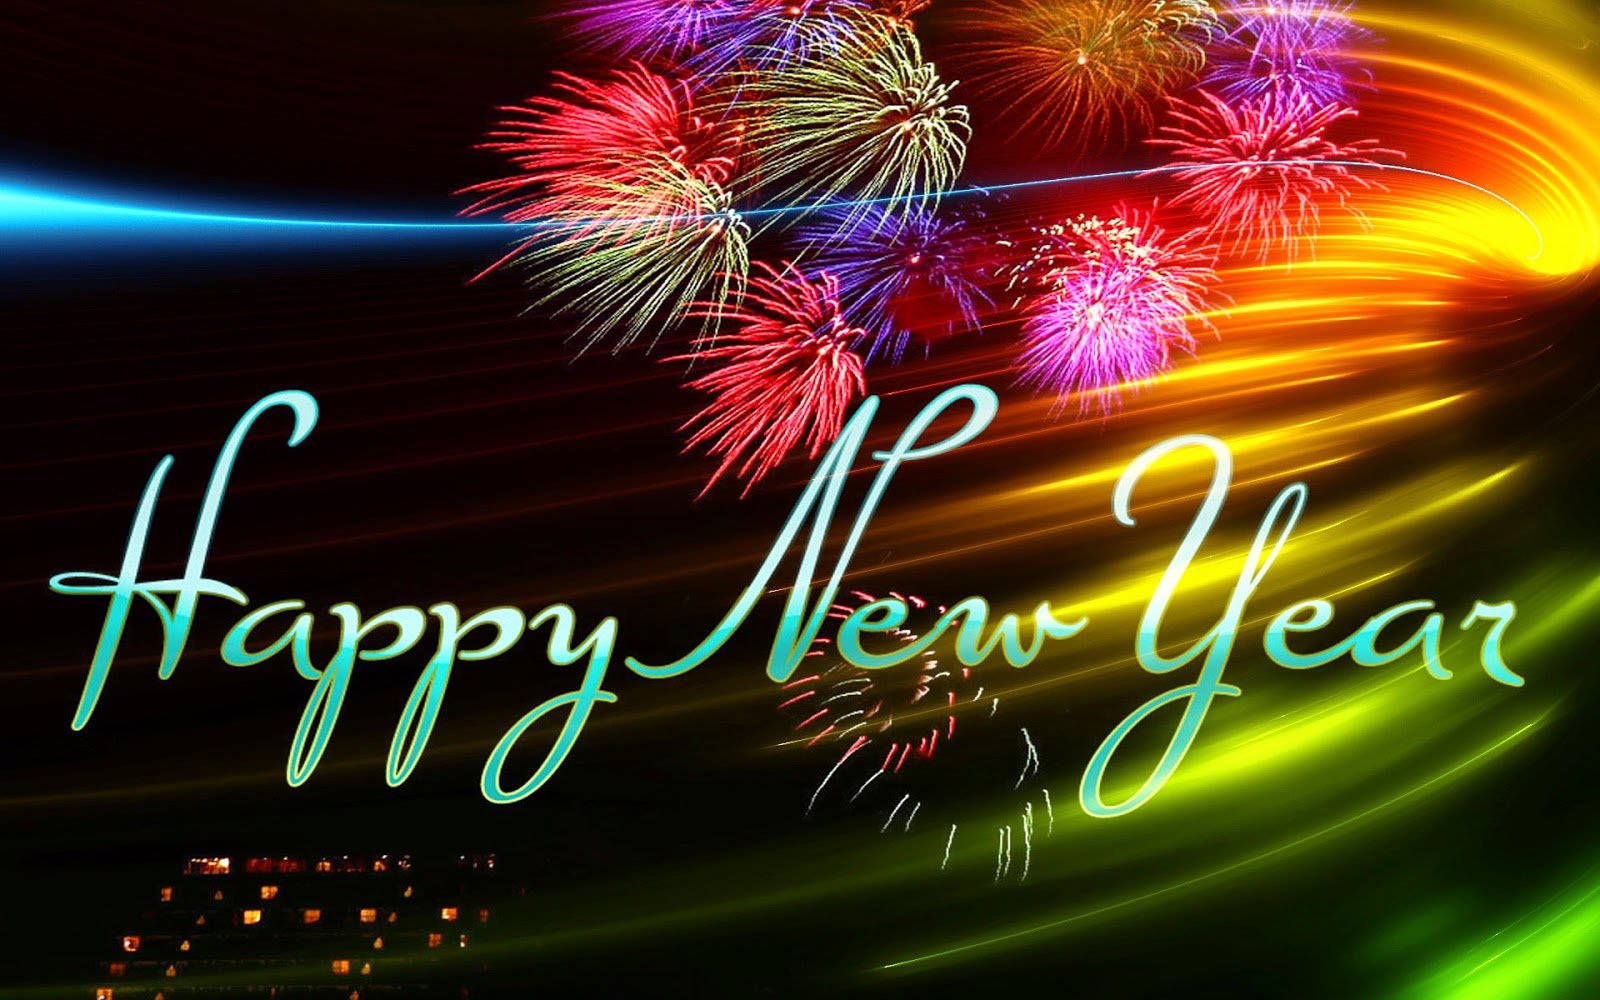  happy new year 2016 welcome new year wallpaper 2016 wallpaper download